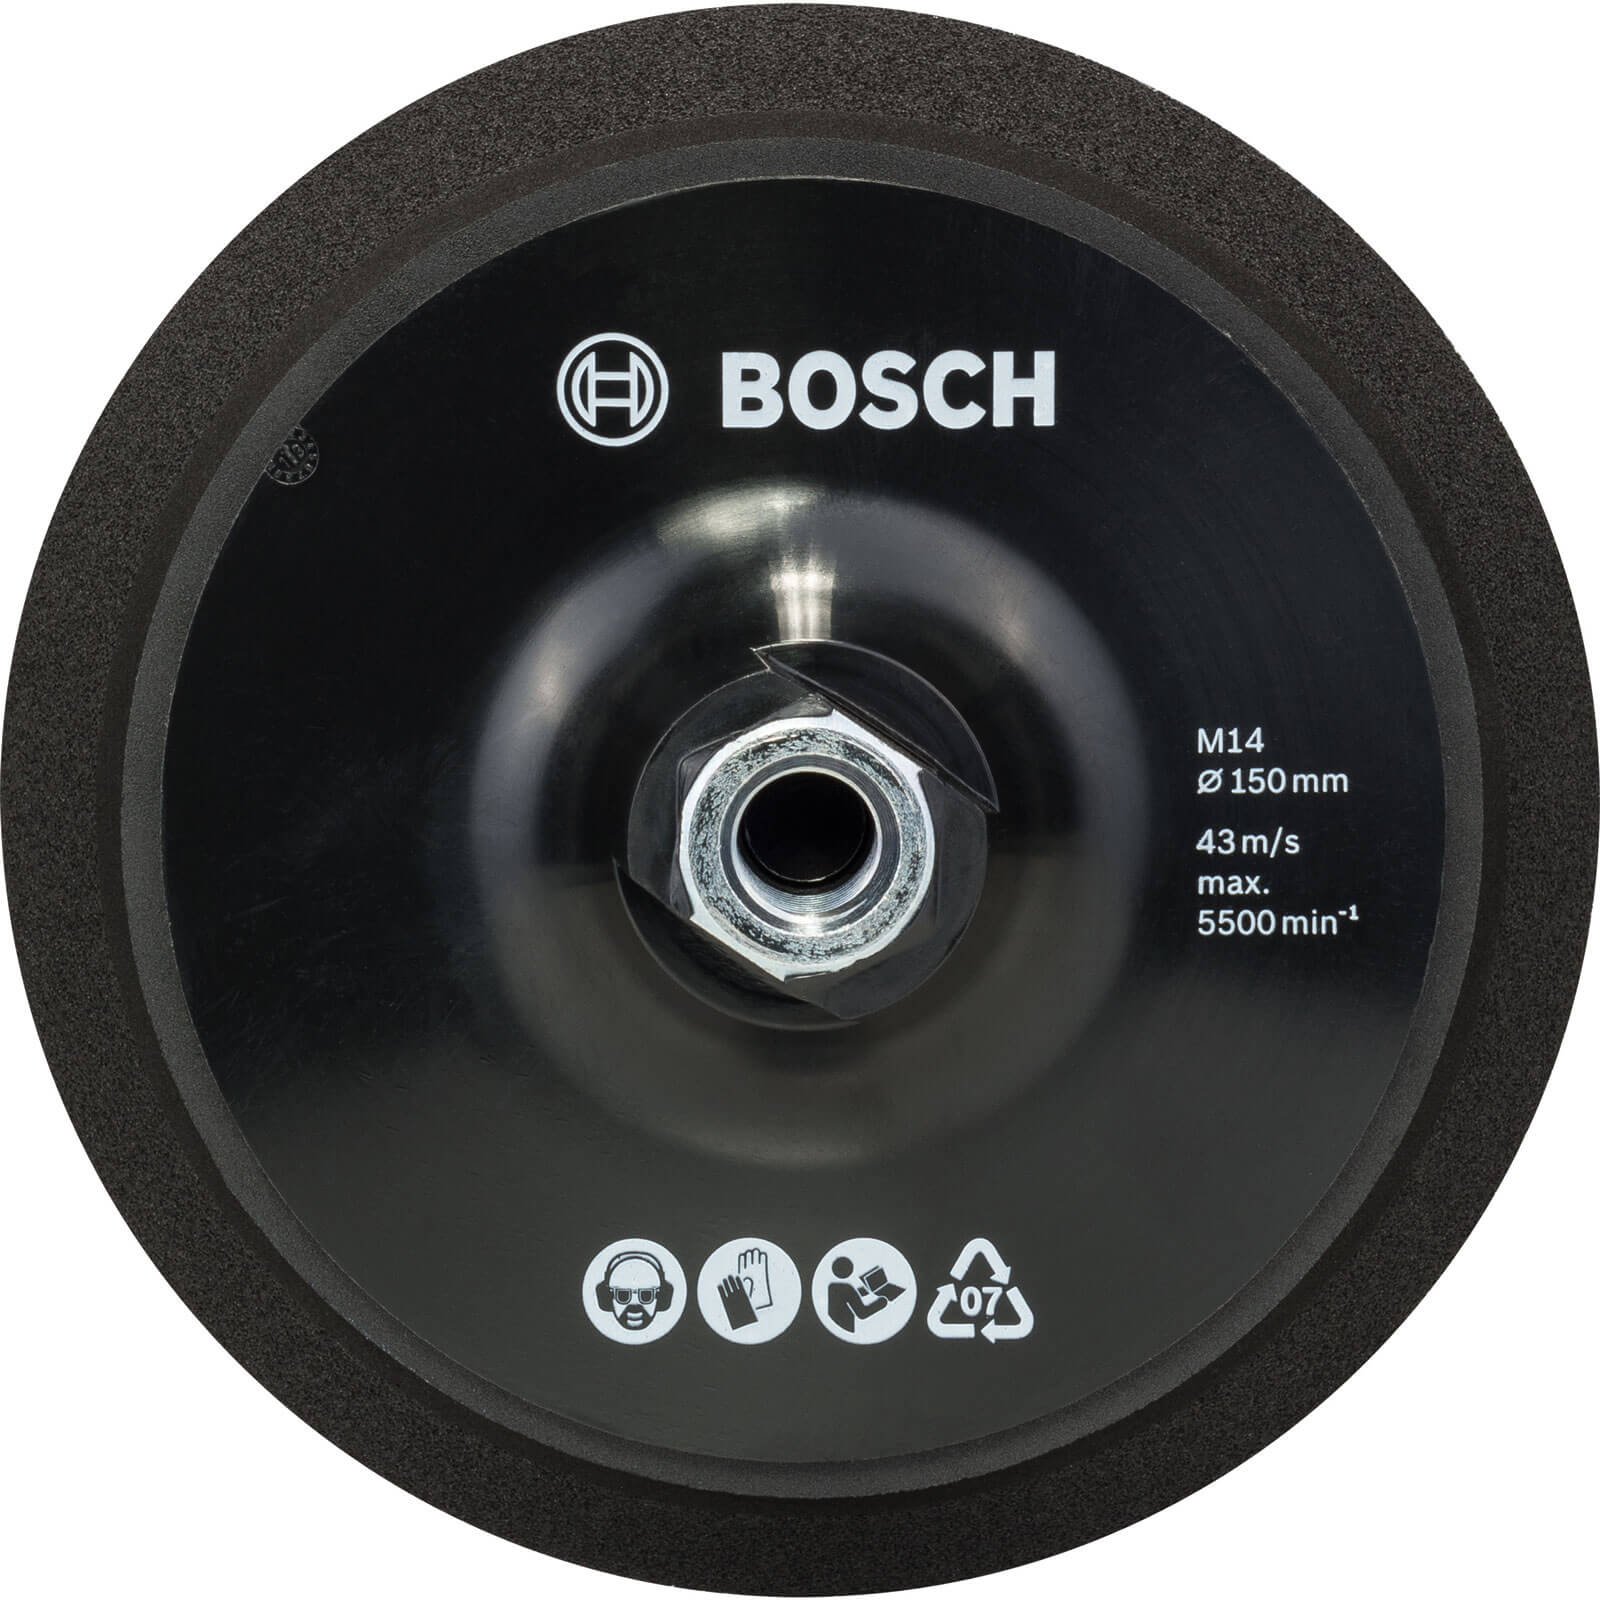 Image of Bosch M14 Hook and Loop Backing Pad 150mm